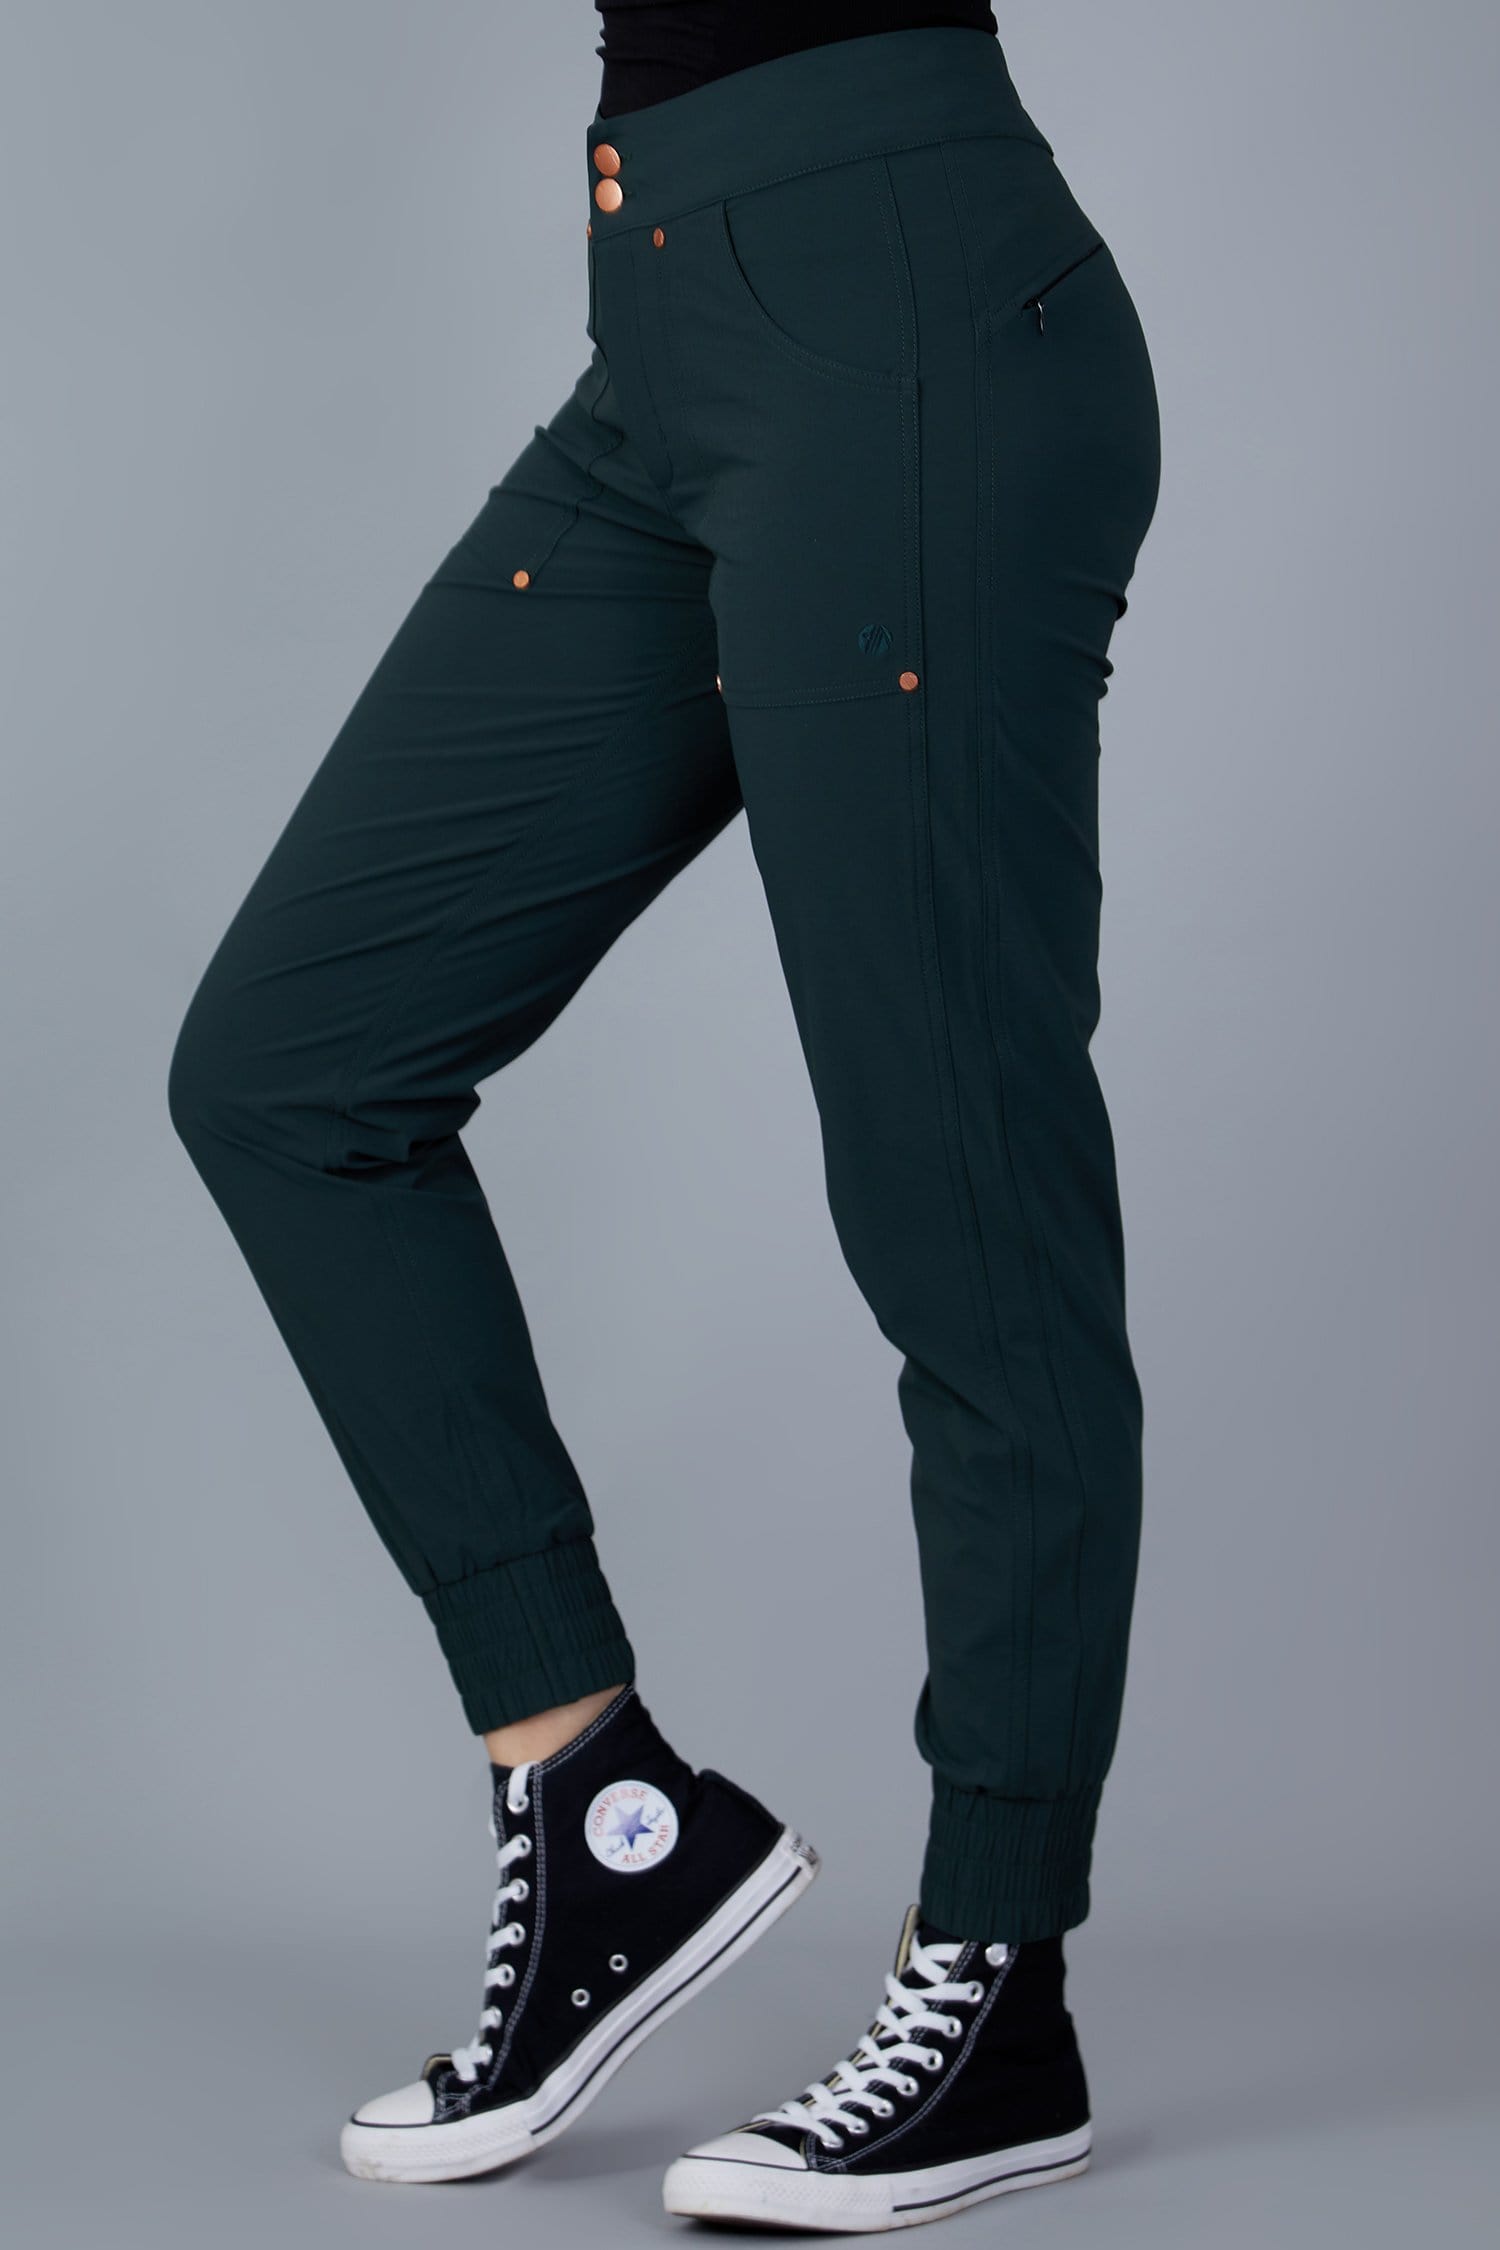 Casual Stroll Pants - Forest Green - 32l / Uk14 - Womens - Acai Outdoorwear